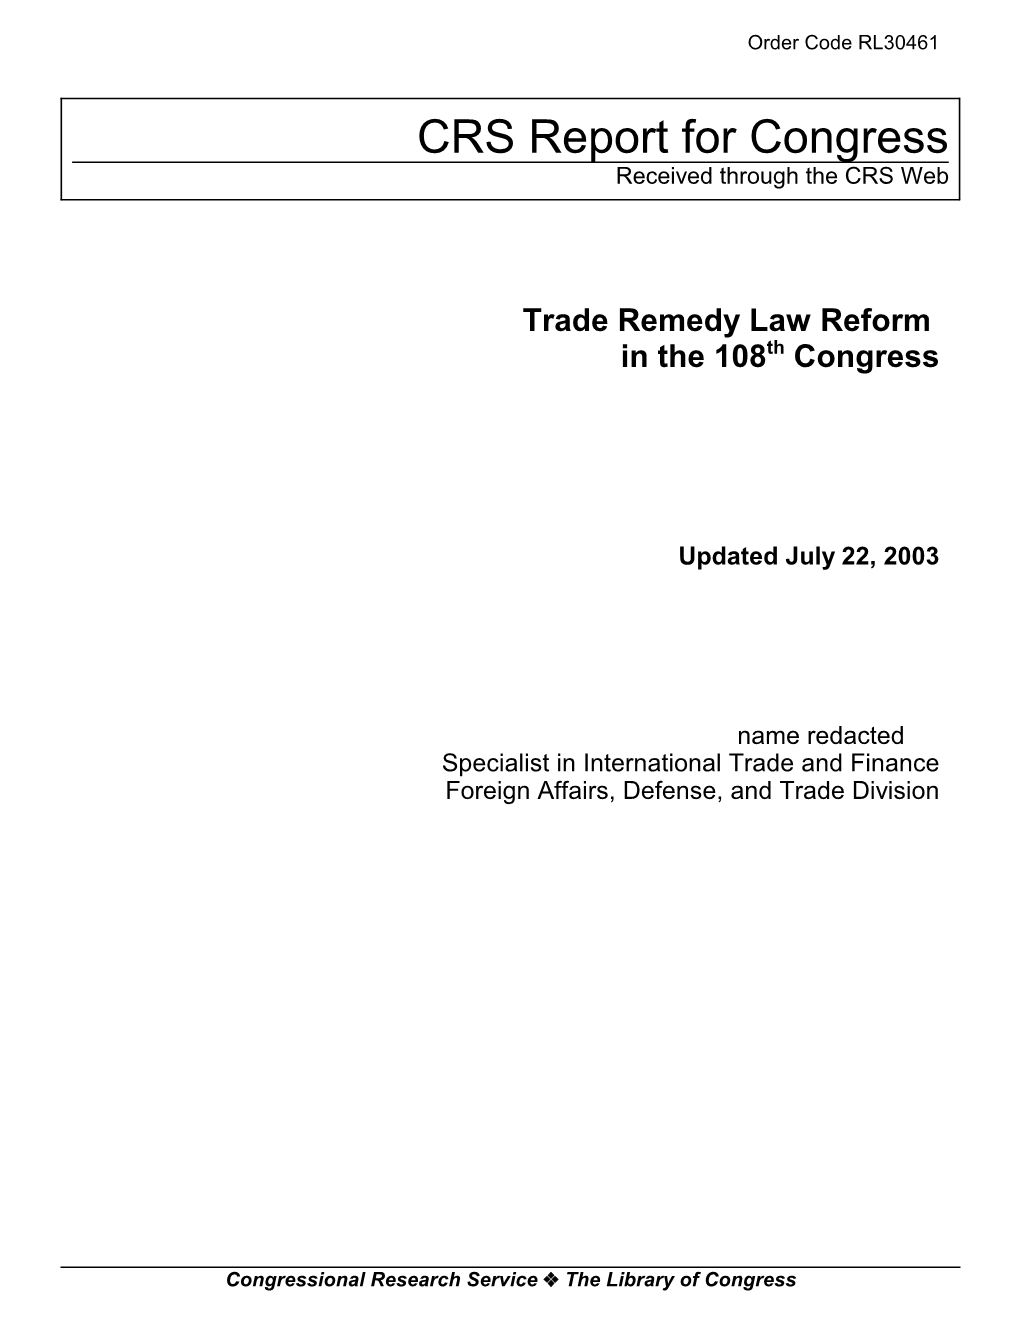 Trade Remedy Law Reform in the 108Th Congress